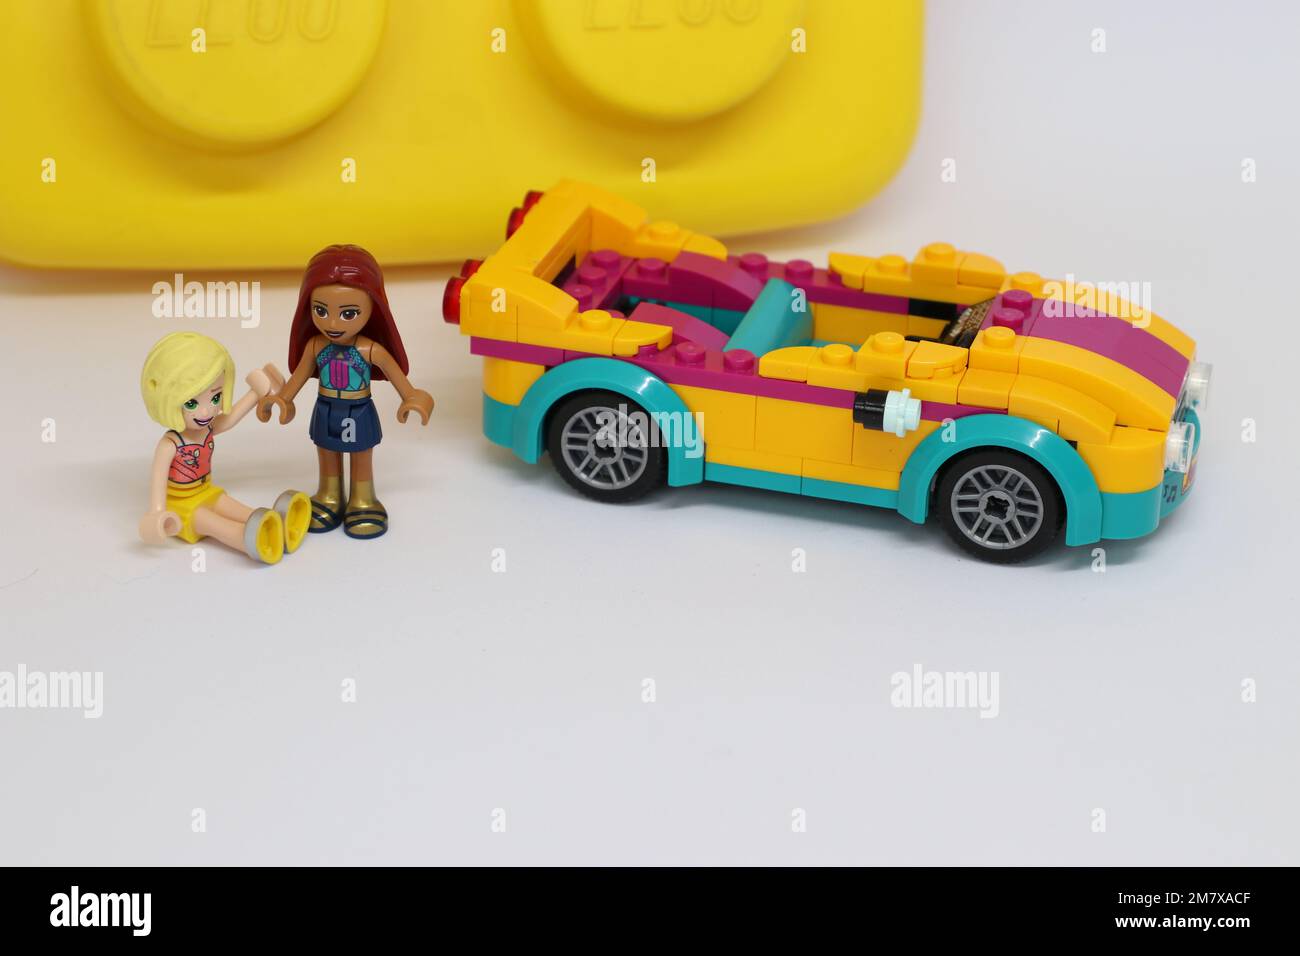 2 lego mini figures next to a lego sports car holding hands Stock Photo